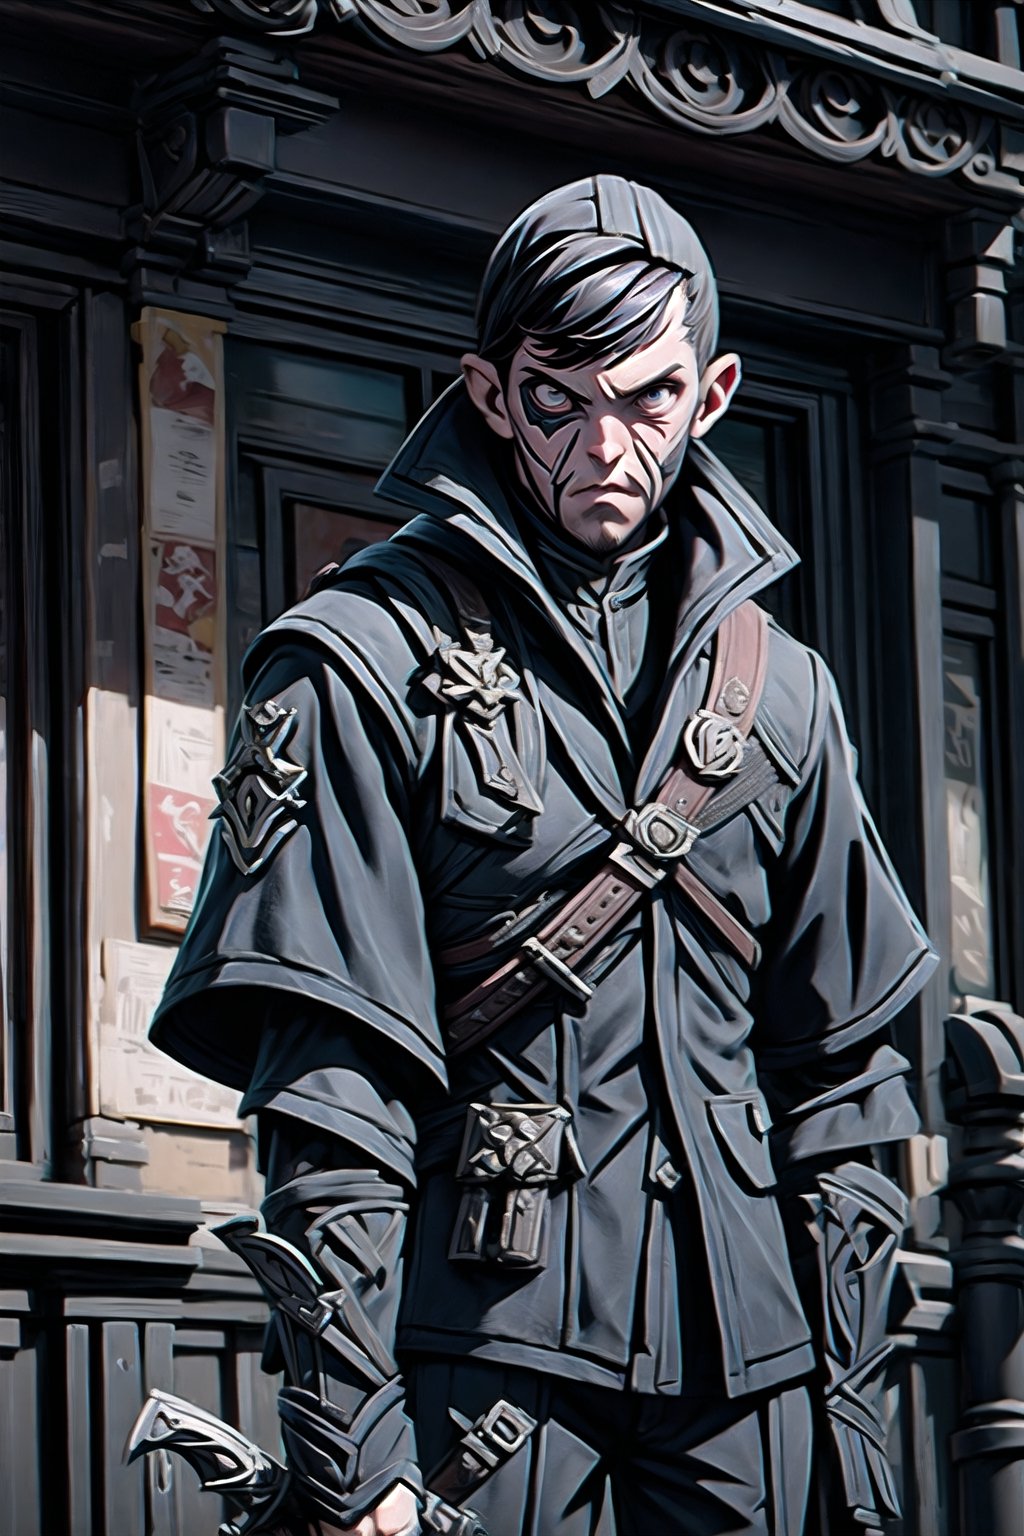 Dishonored 2 game, drawing of the character of Corvo, holding his sword, and wearing his mask, in the city, art